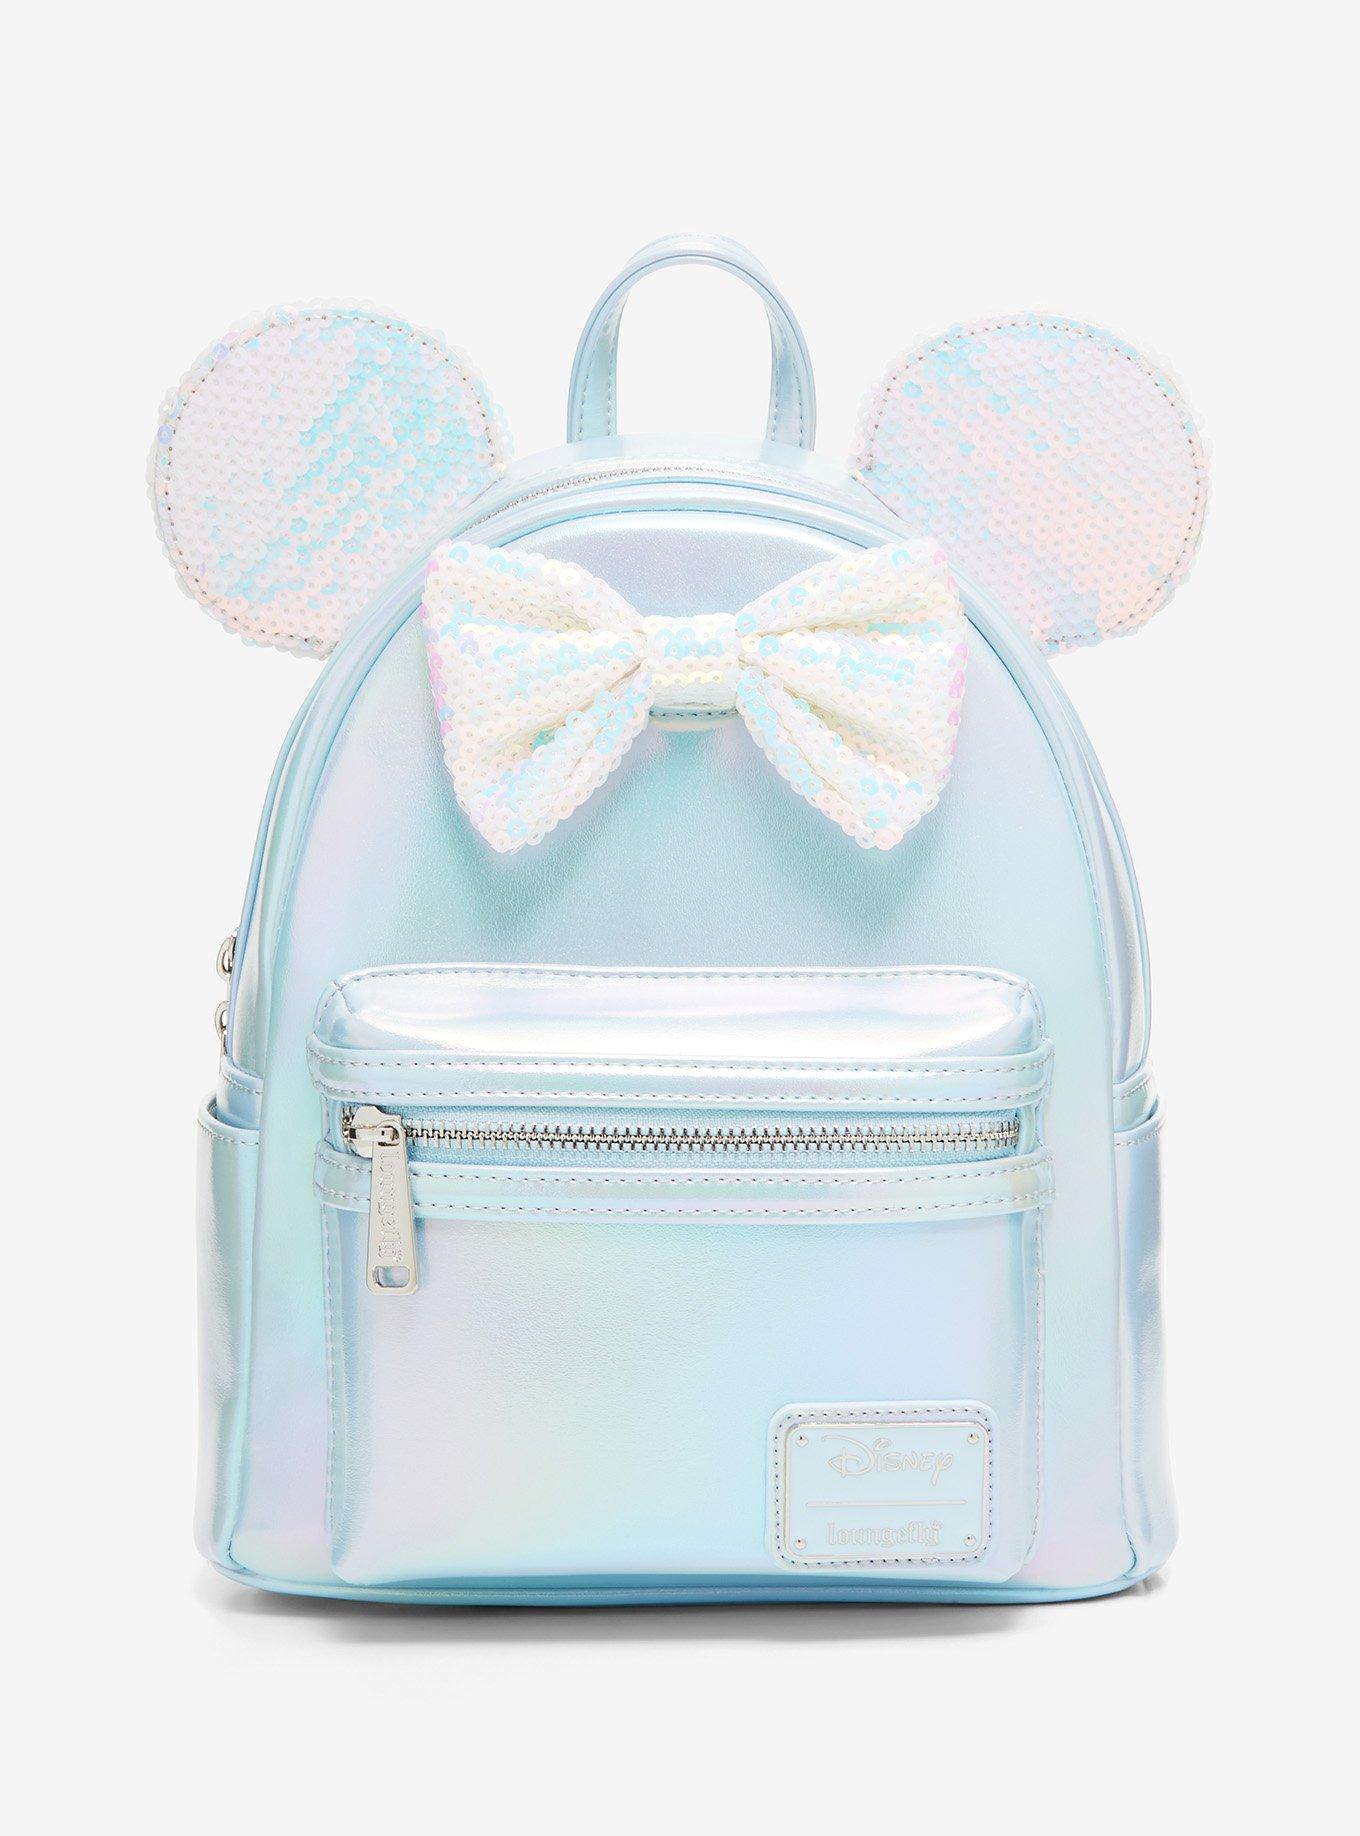 Disney Parks Loungefly Mini Backpack - Minnie Mouse Bow - Sequin